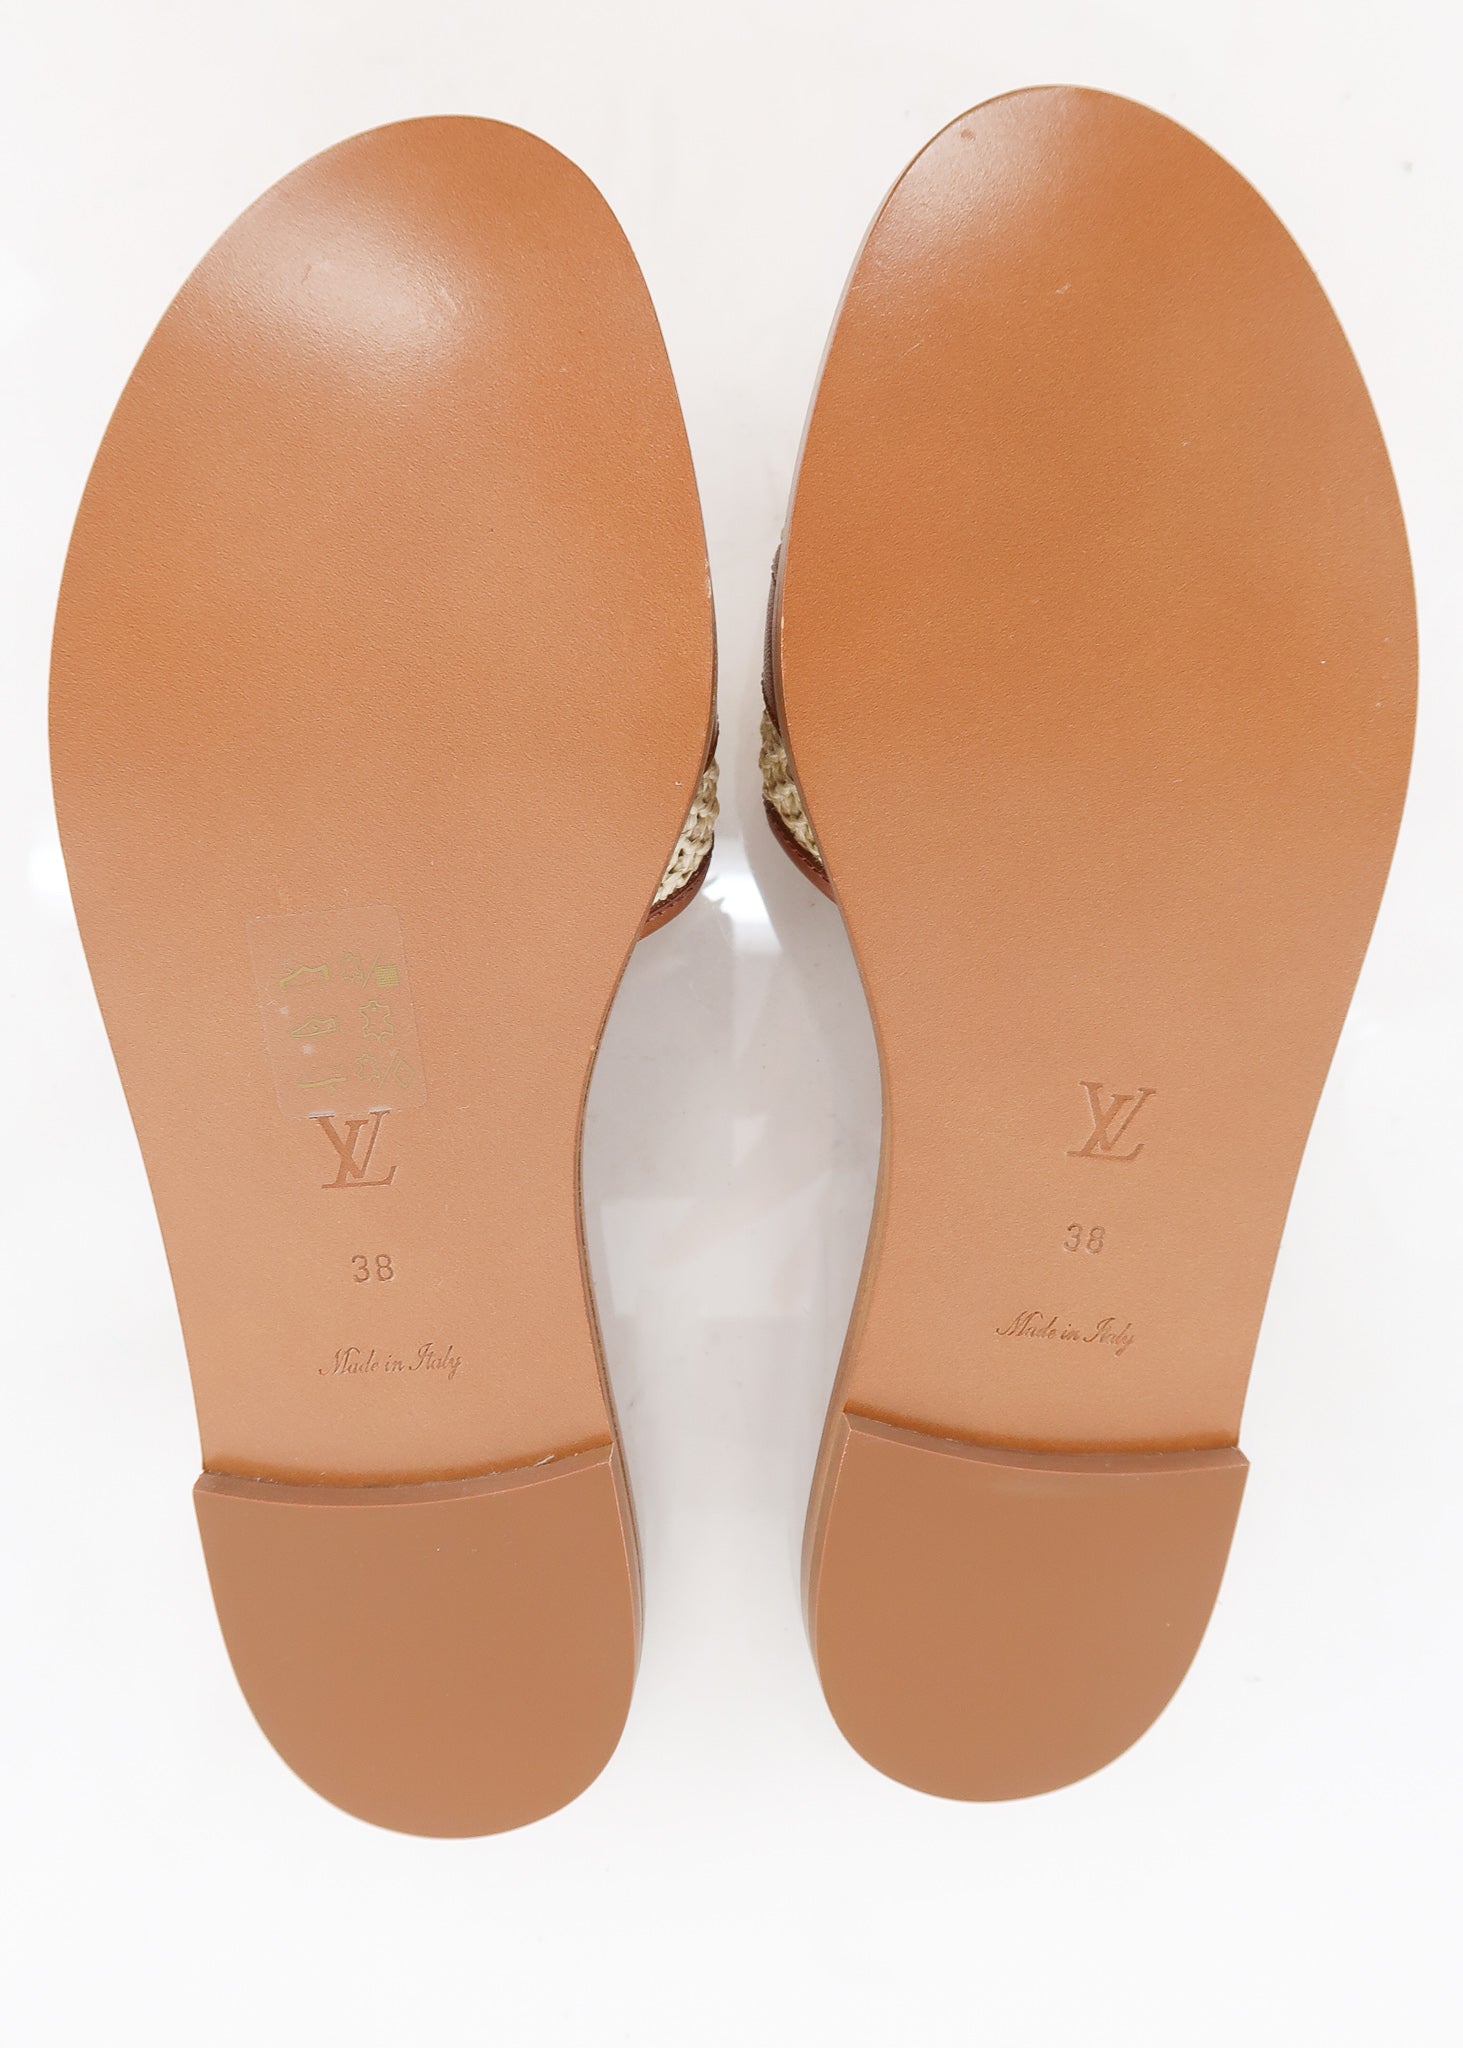 Louis Vuitton - Authenticated Lock It Sandal - Leather Brown for Women, Very Good Condition